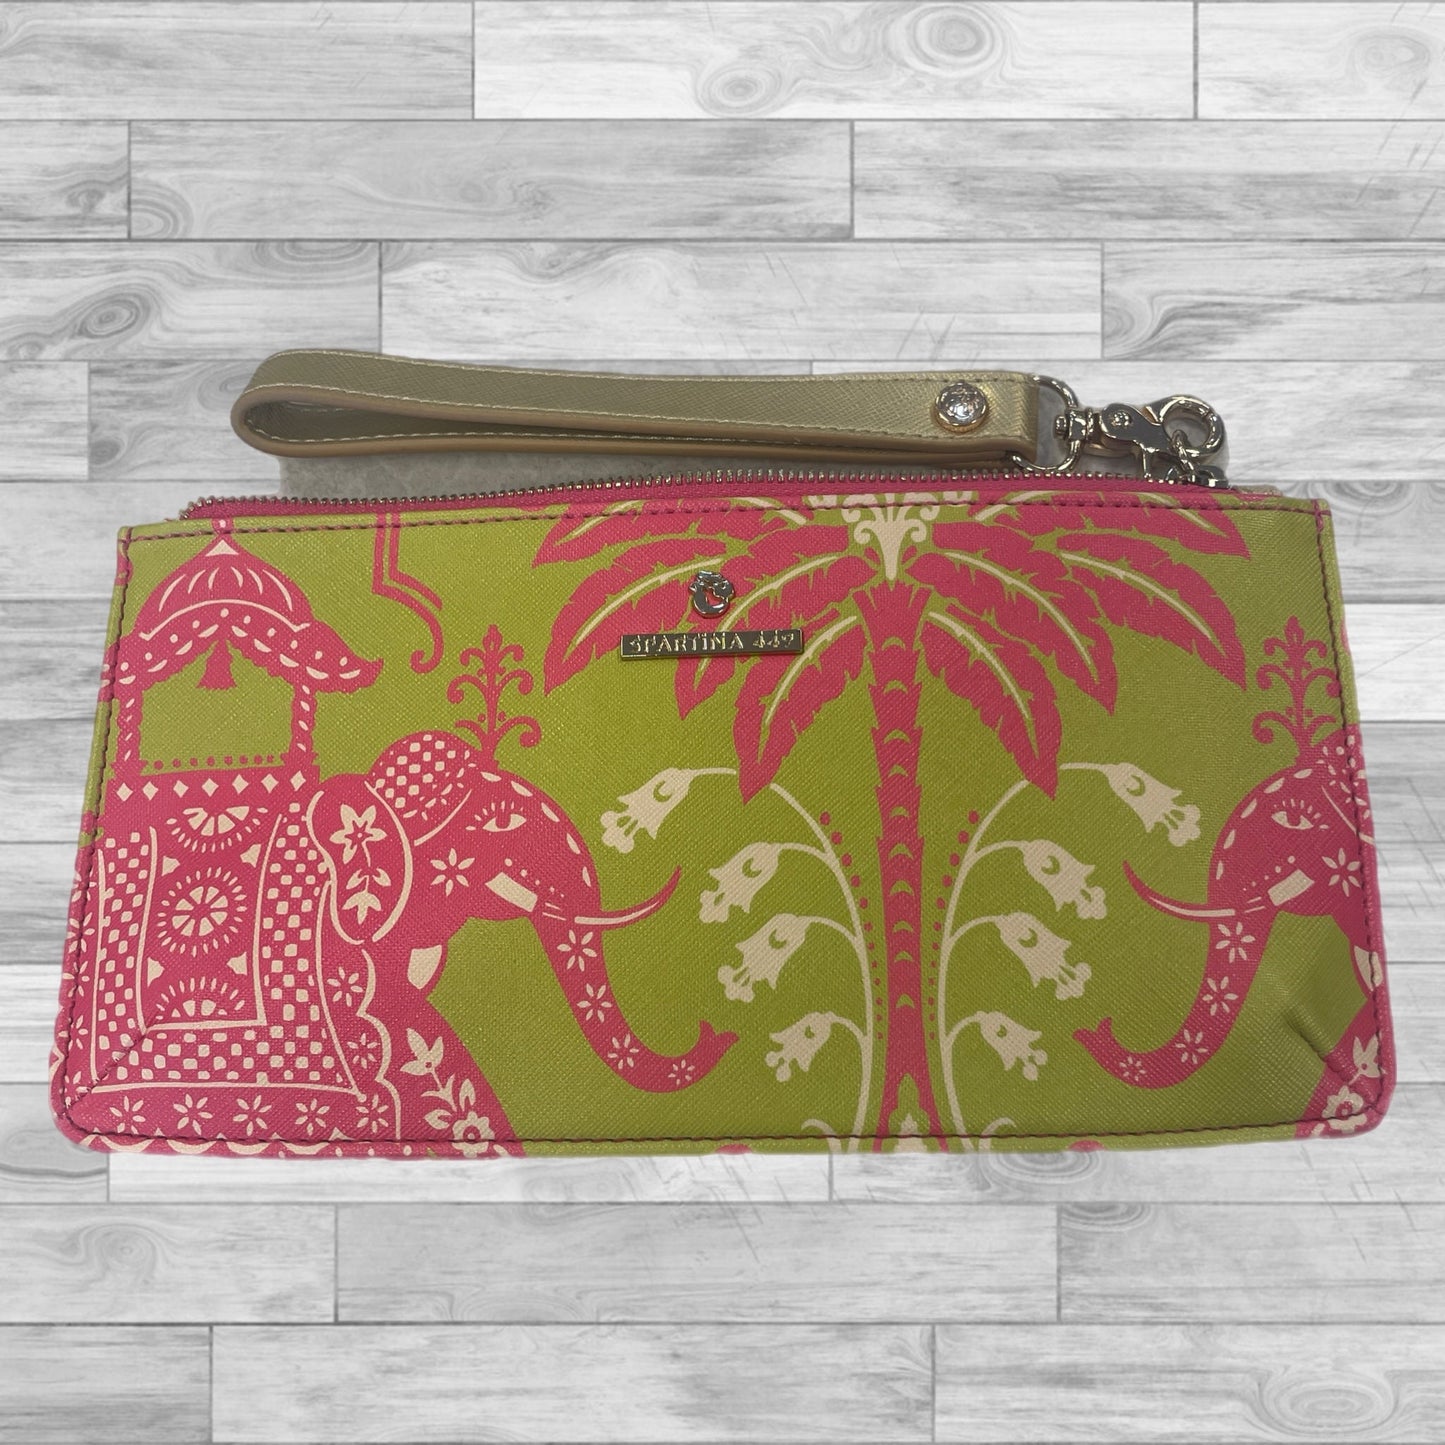 Clutch Spartina, Size Small